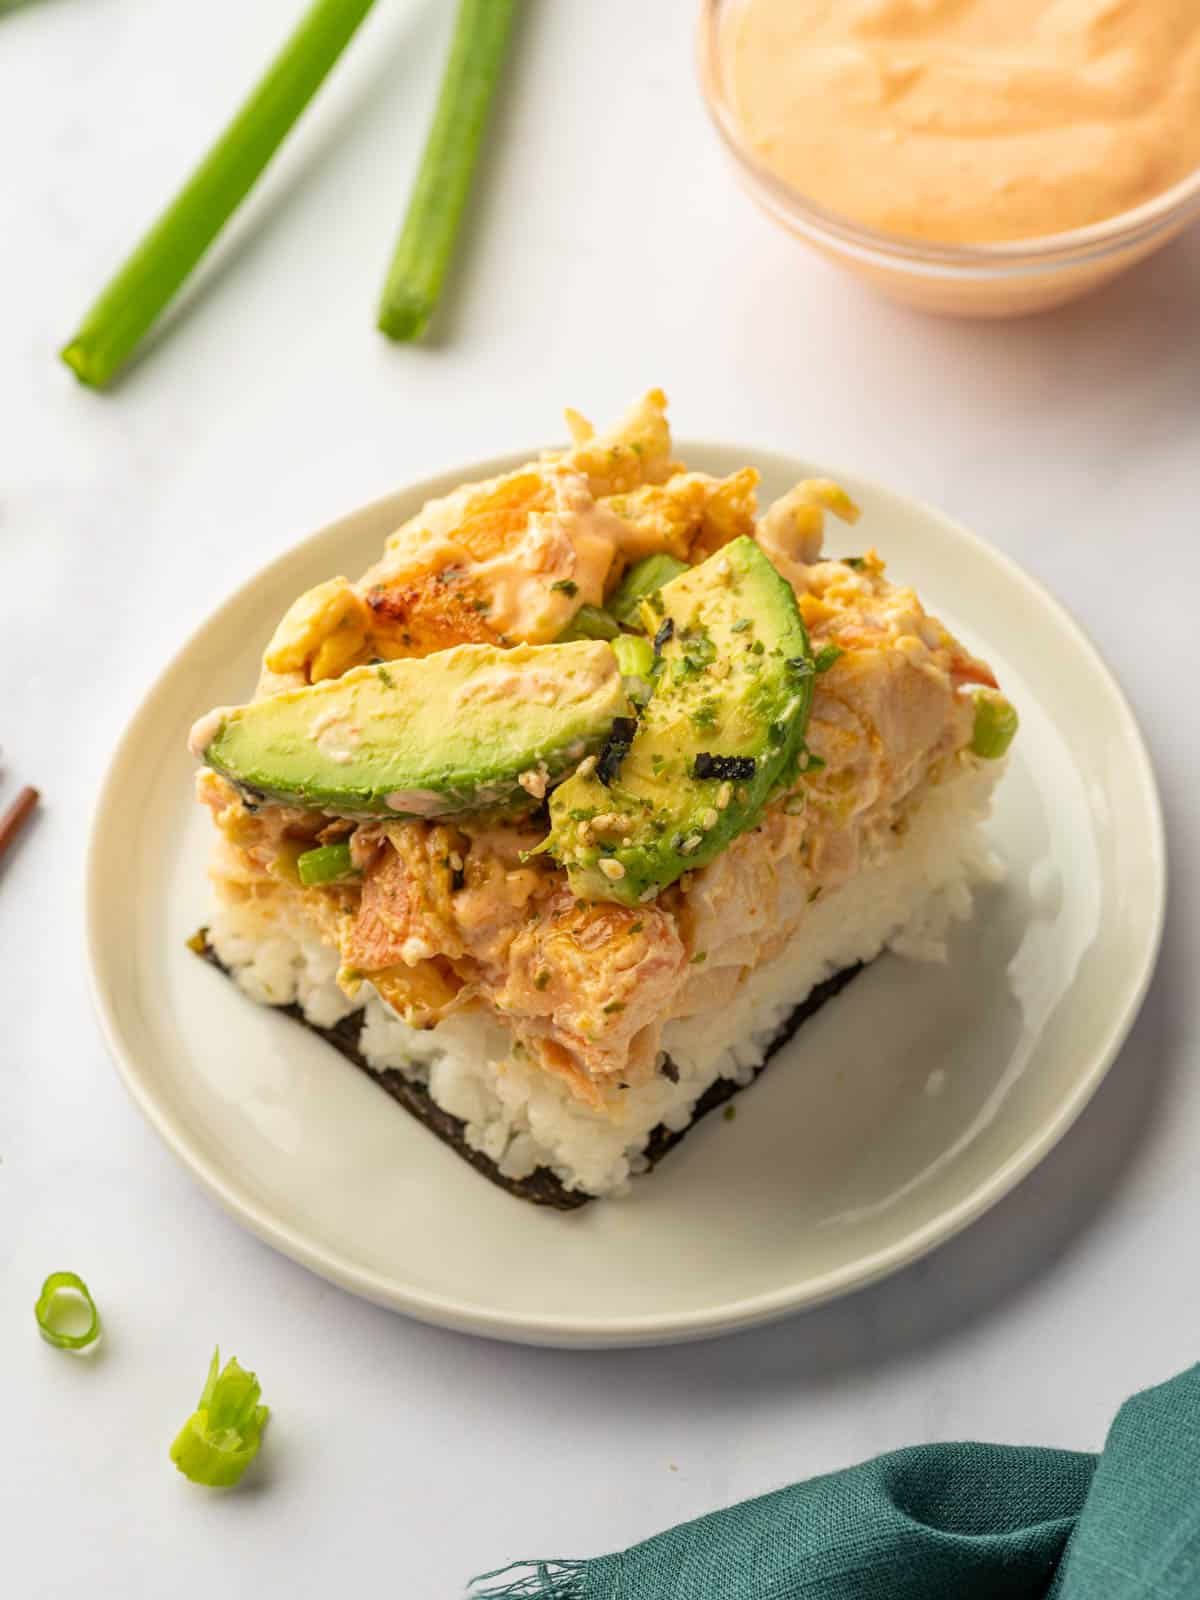 Salmon sushi bake on a plate for serving.